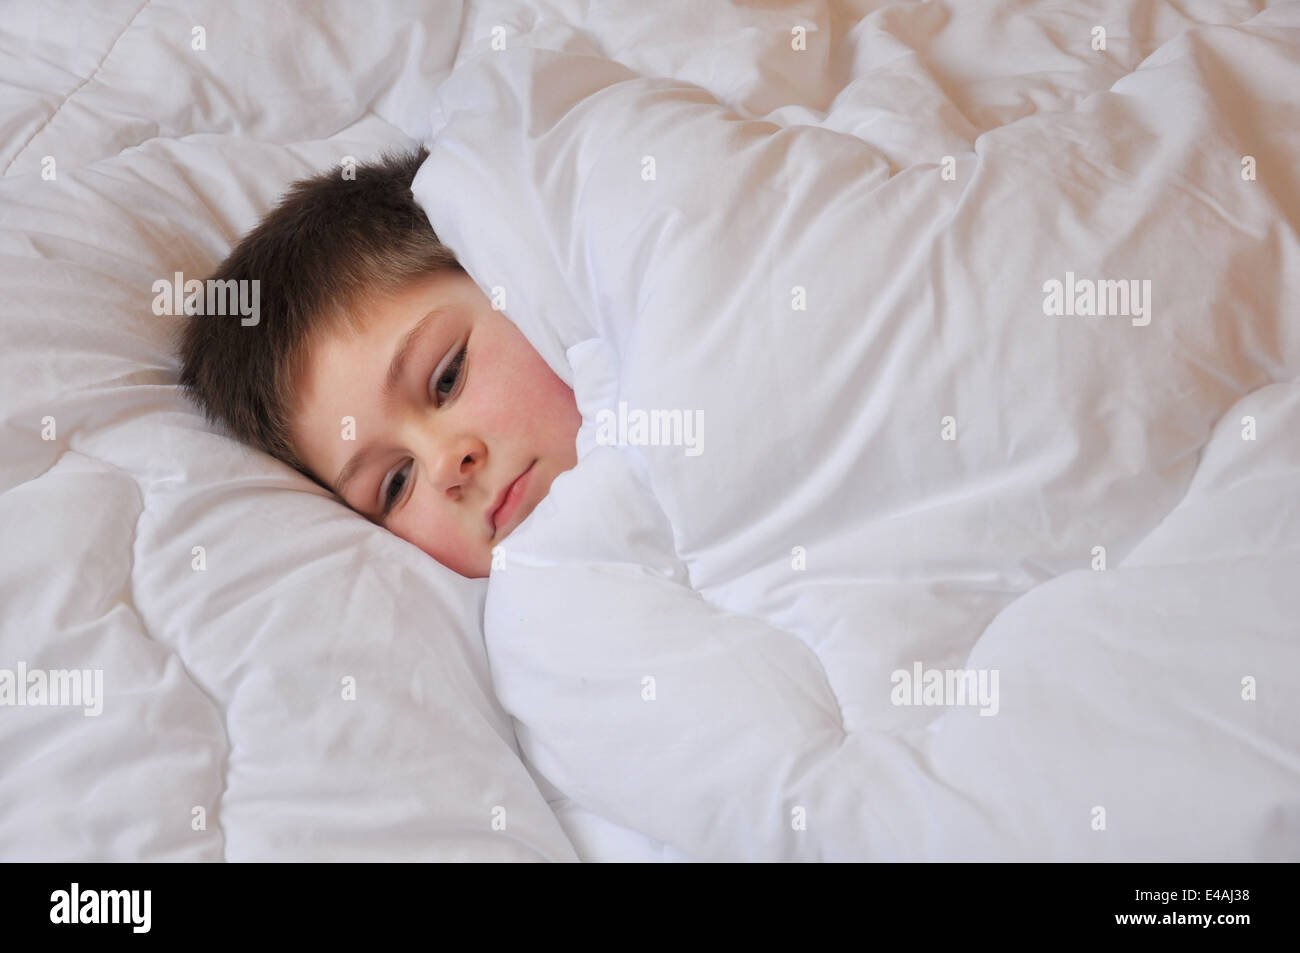 sick  boy schoolboy seven years old lies bed laid blanket white grieves sad thoughtful one Stock Photo